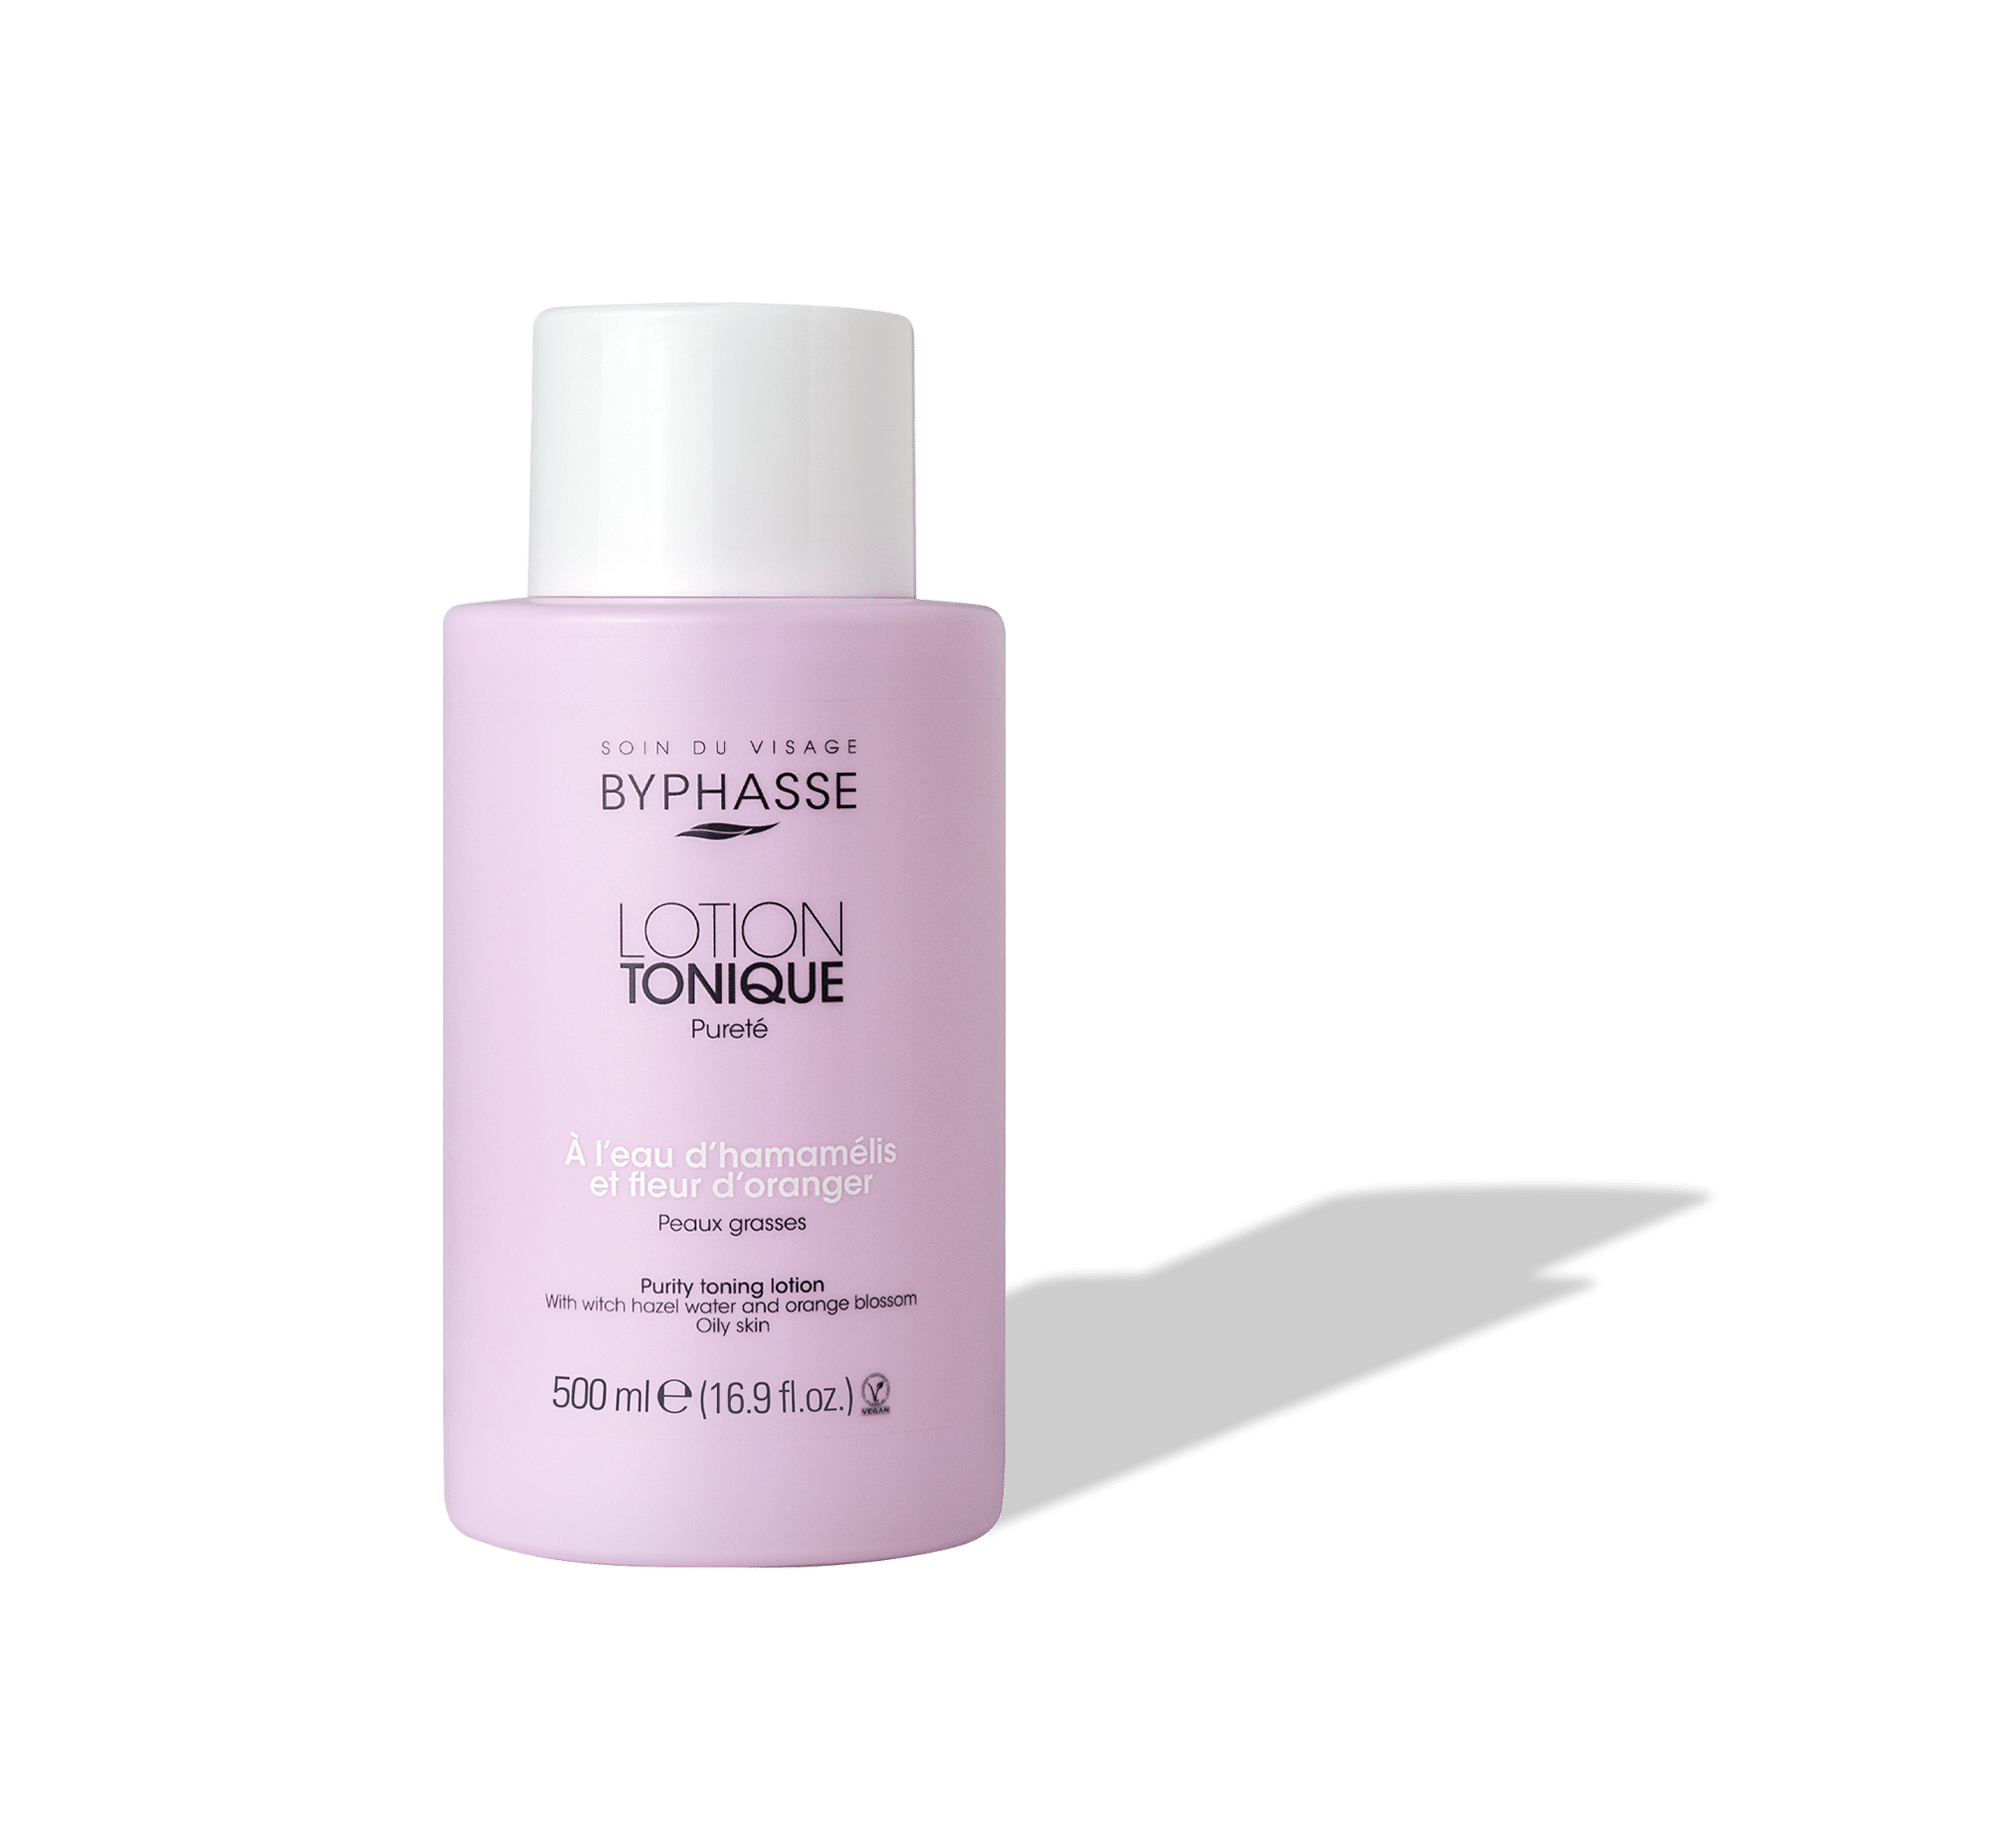 Purity toning lotion oily skin 500 ml | Byphasse